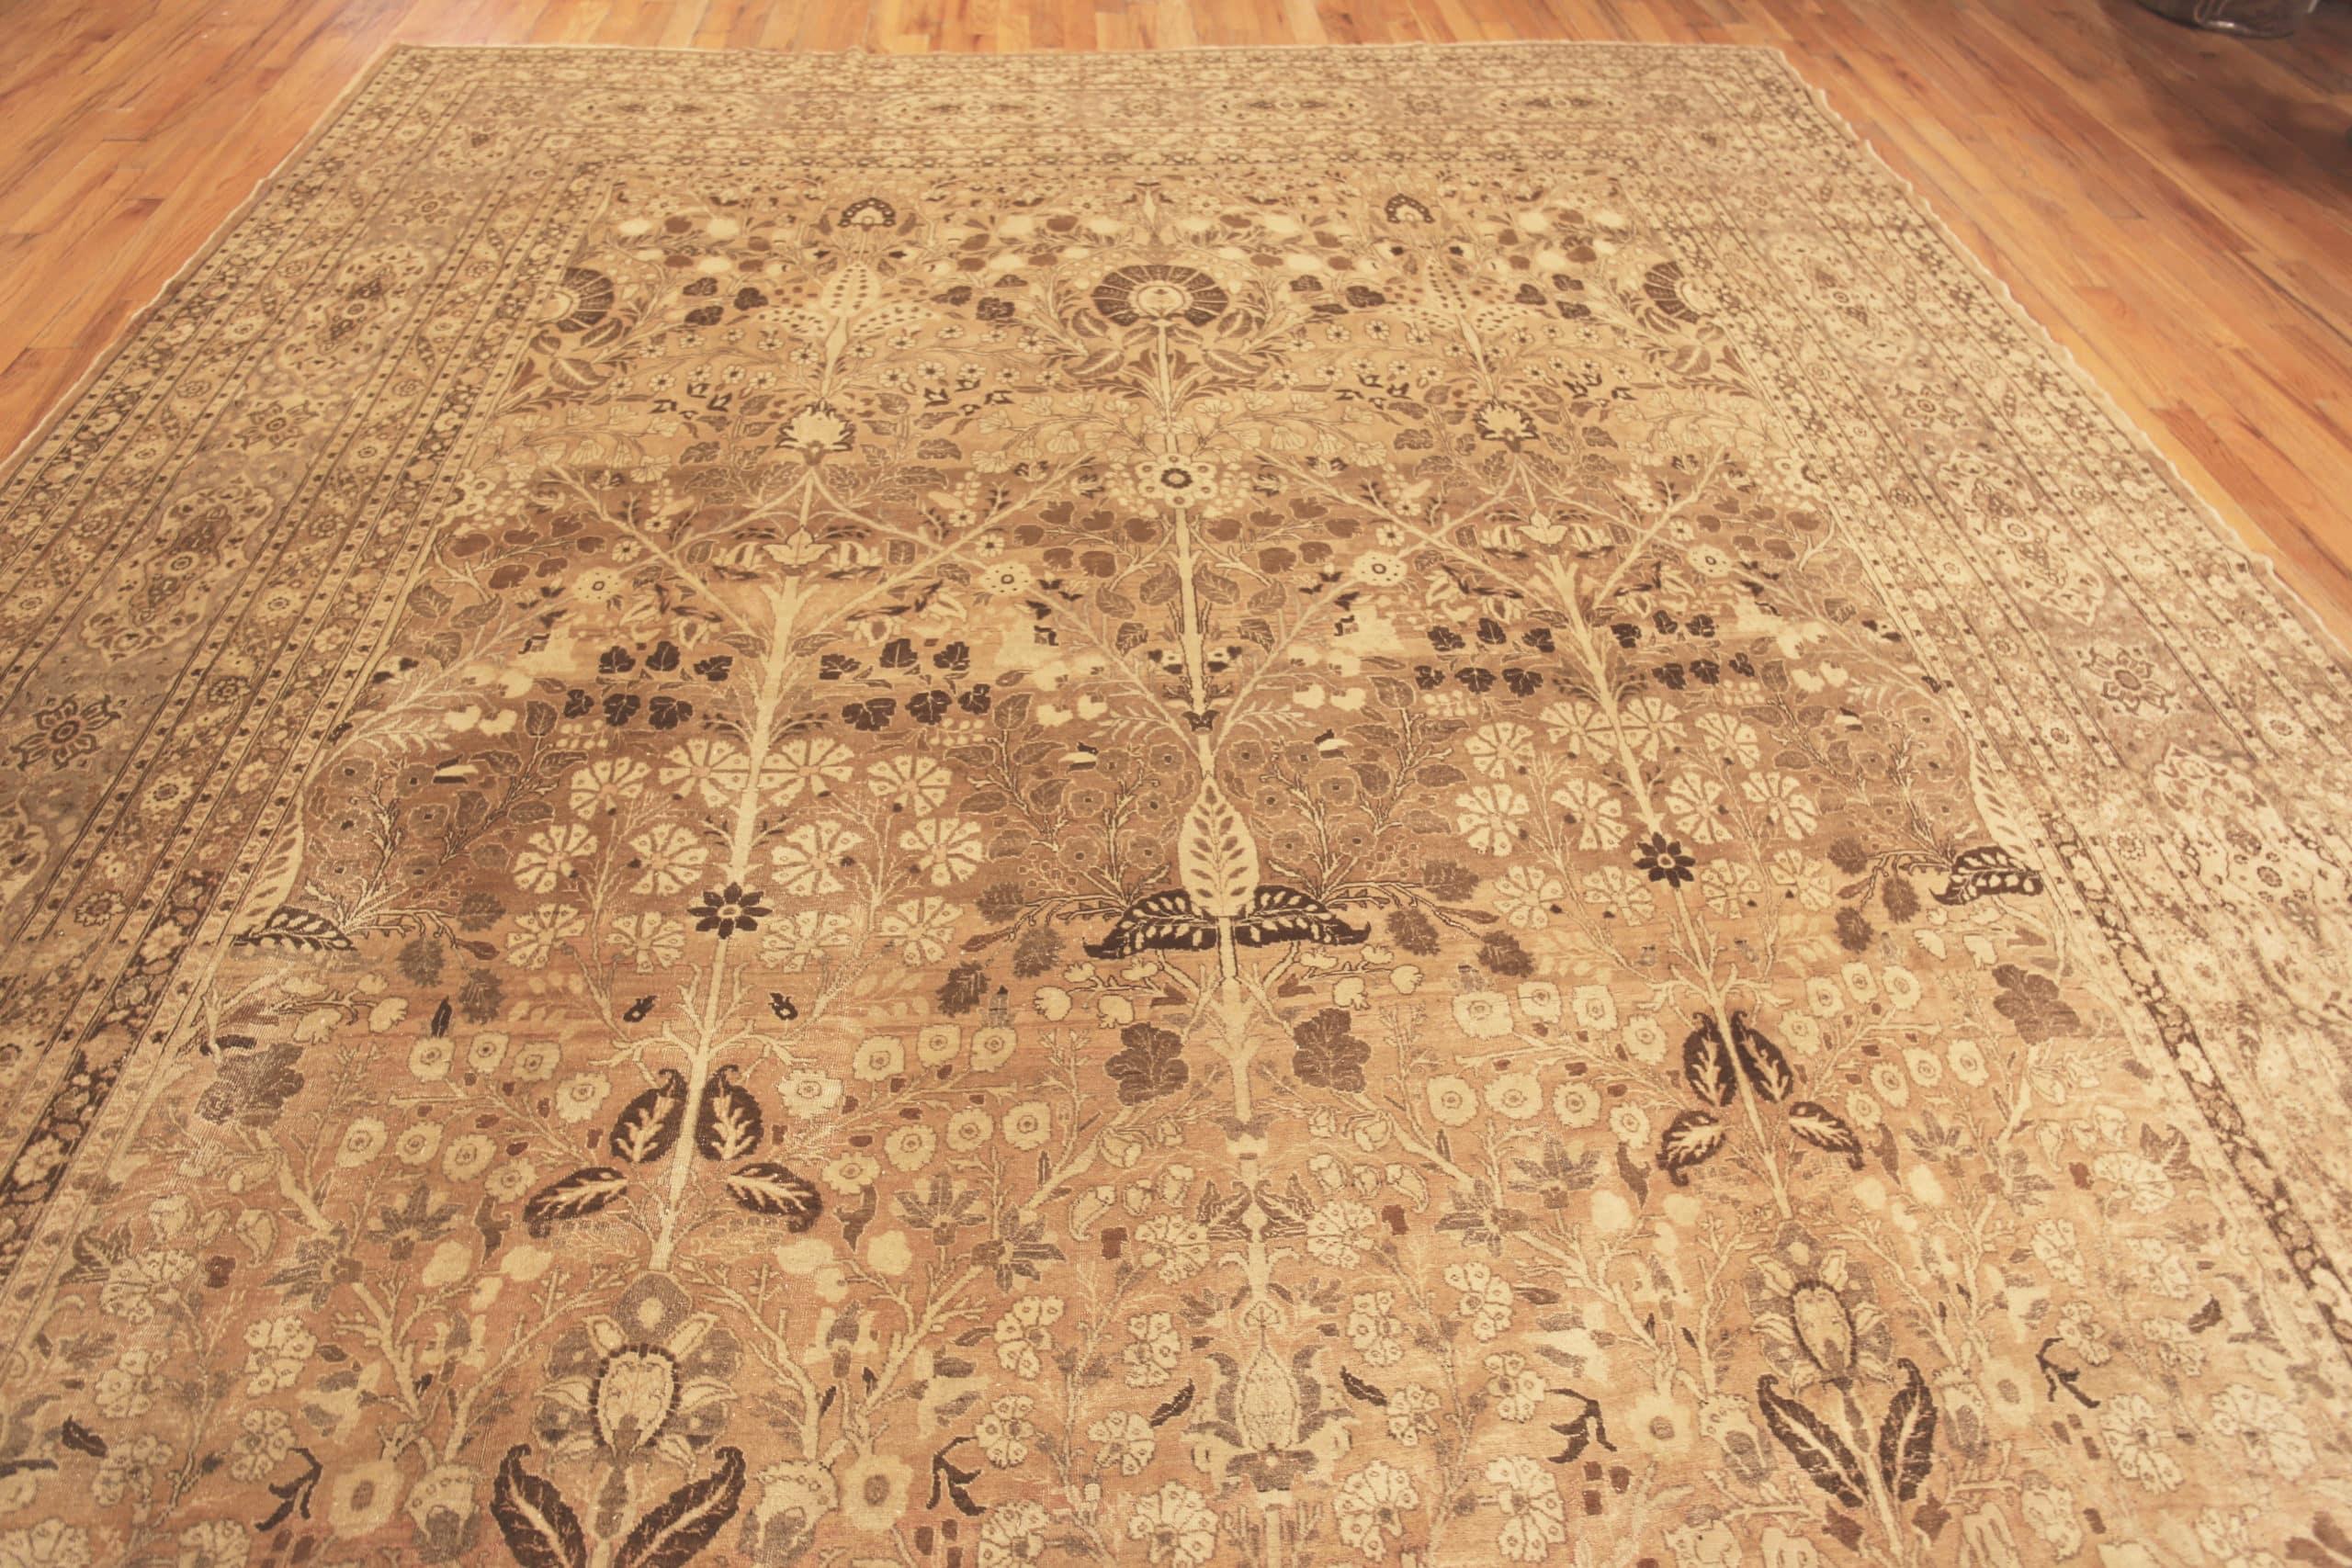 Beautiful Fine Neutral Decorative Large Antique Persian Tabriz Vase Tree Of Life Design Abrash Rug, Country of Origin: Persia, Circa Date: 1920. Size: 11 ft 7 in x 16 ft 8 in (3.53 m x 5.08 m)

